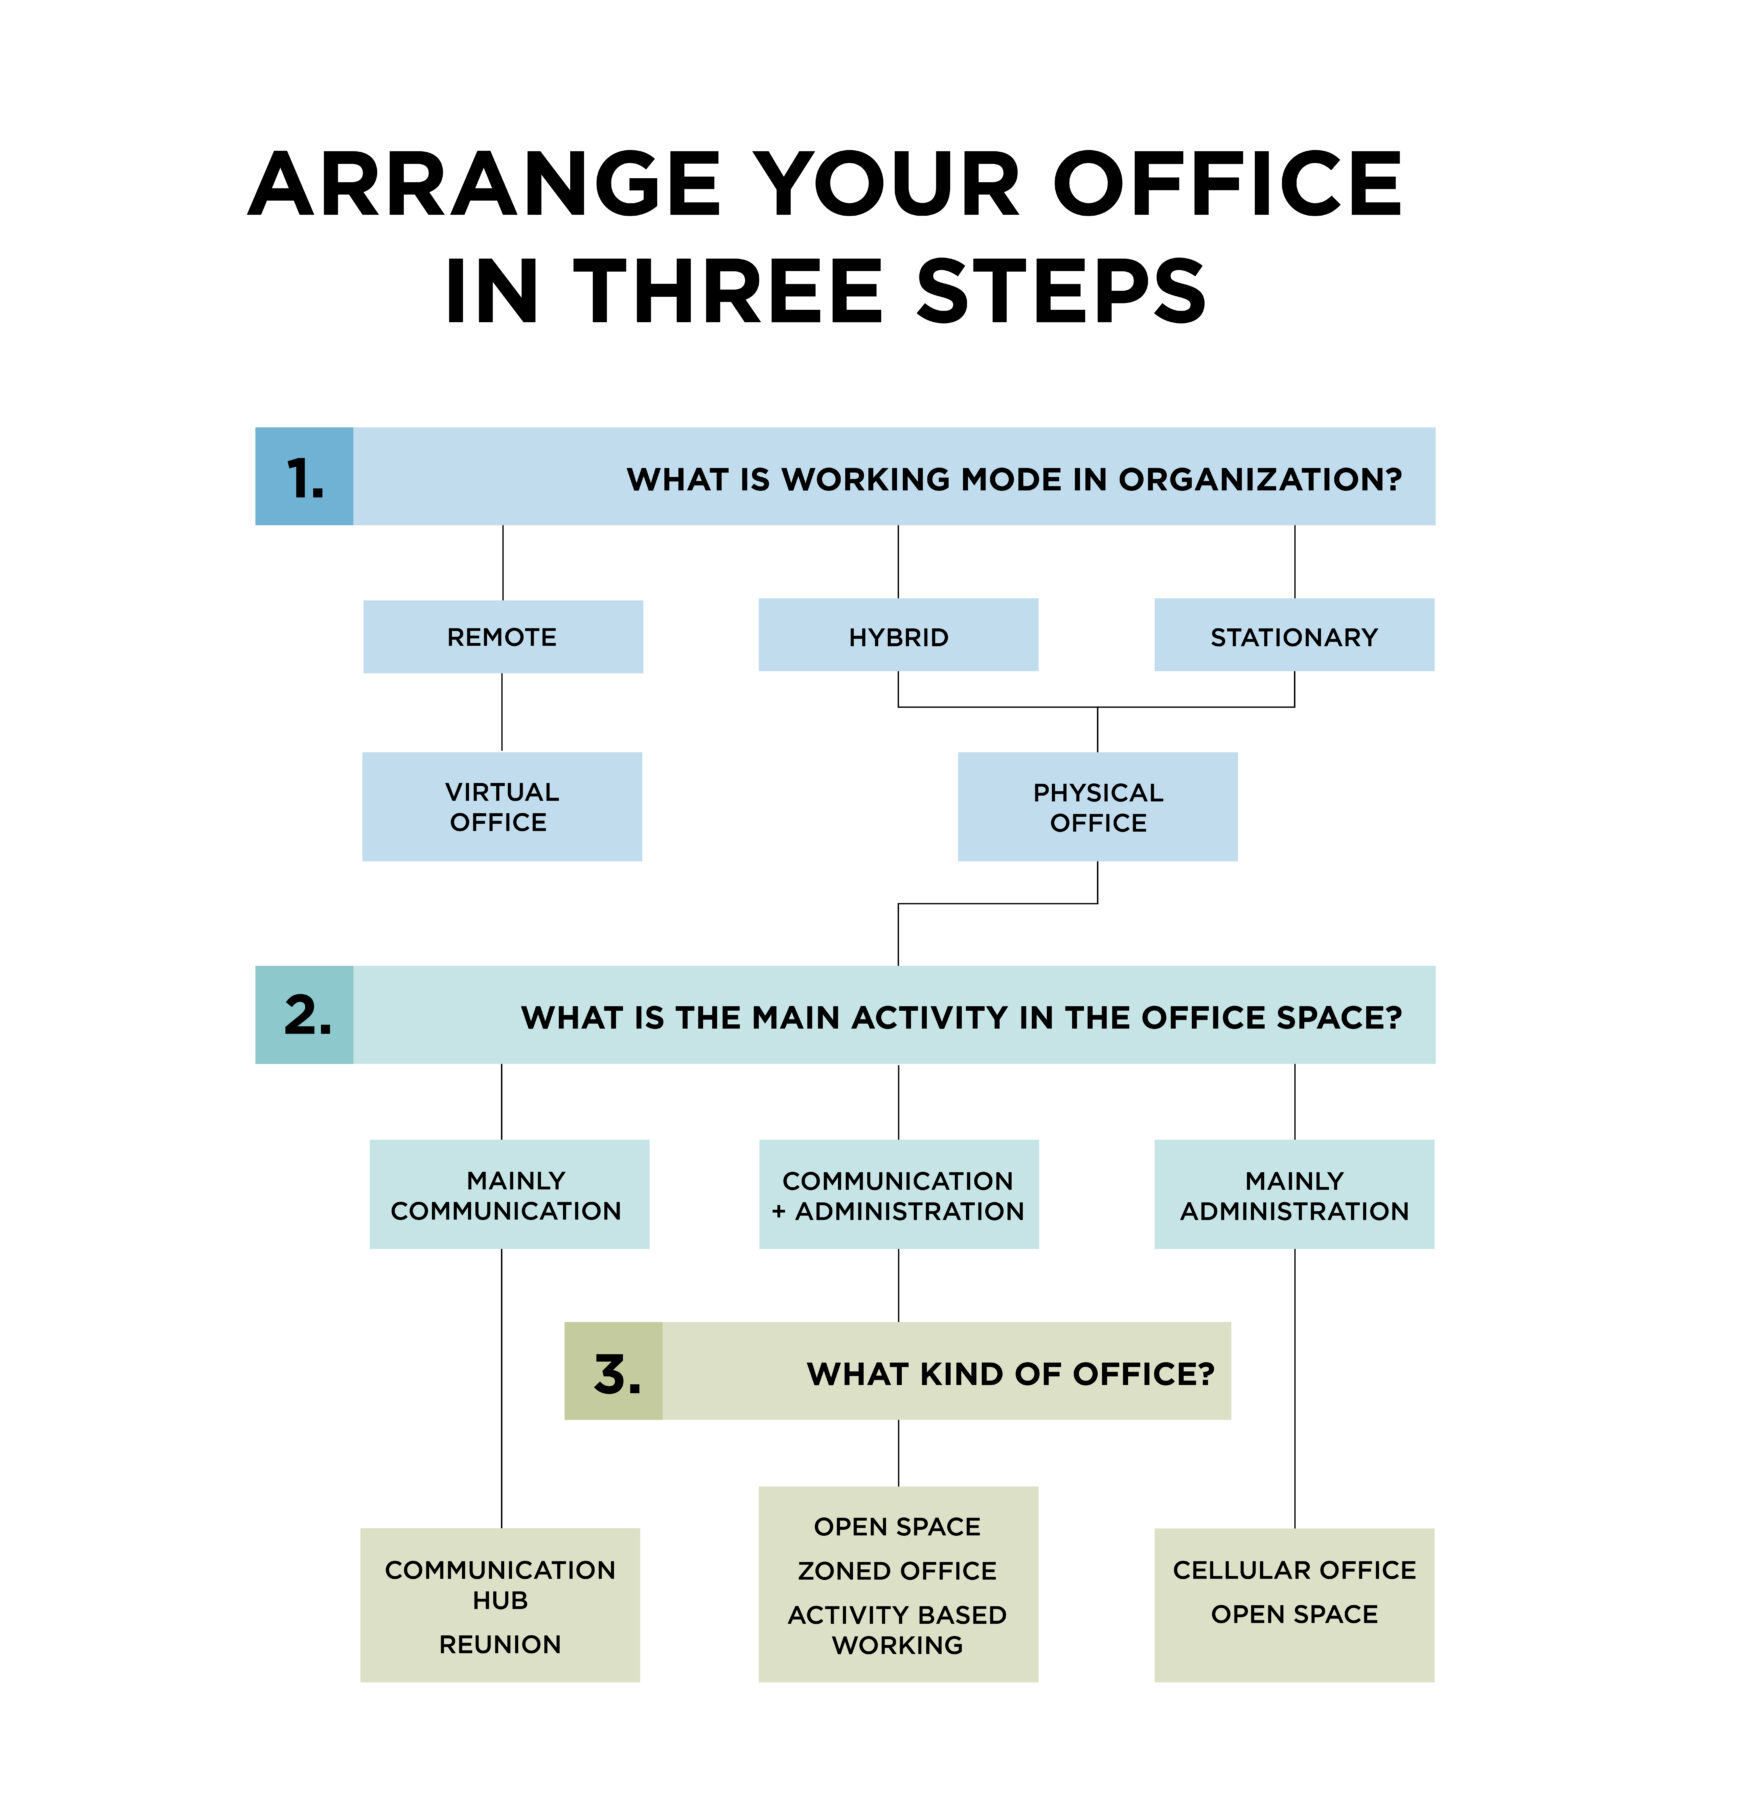 Archisearch Arrange Your Office in Three Steps | by Sato